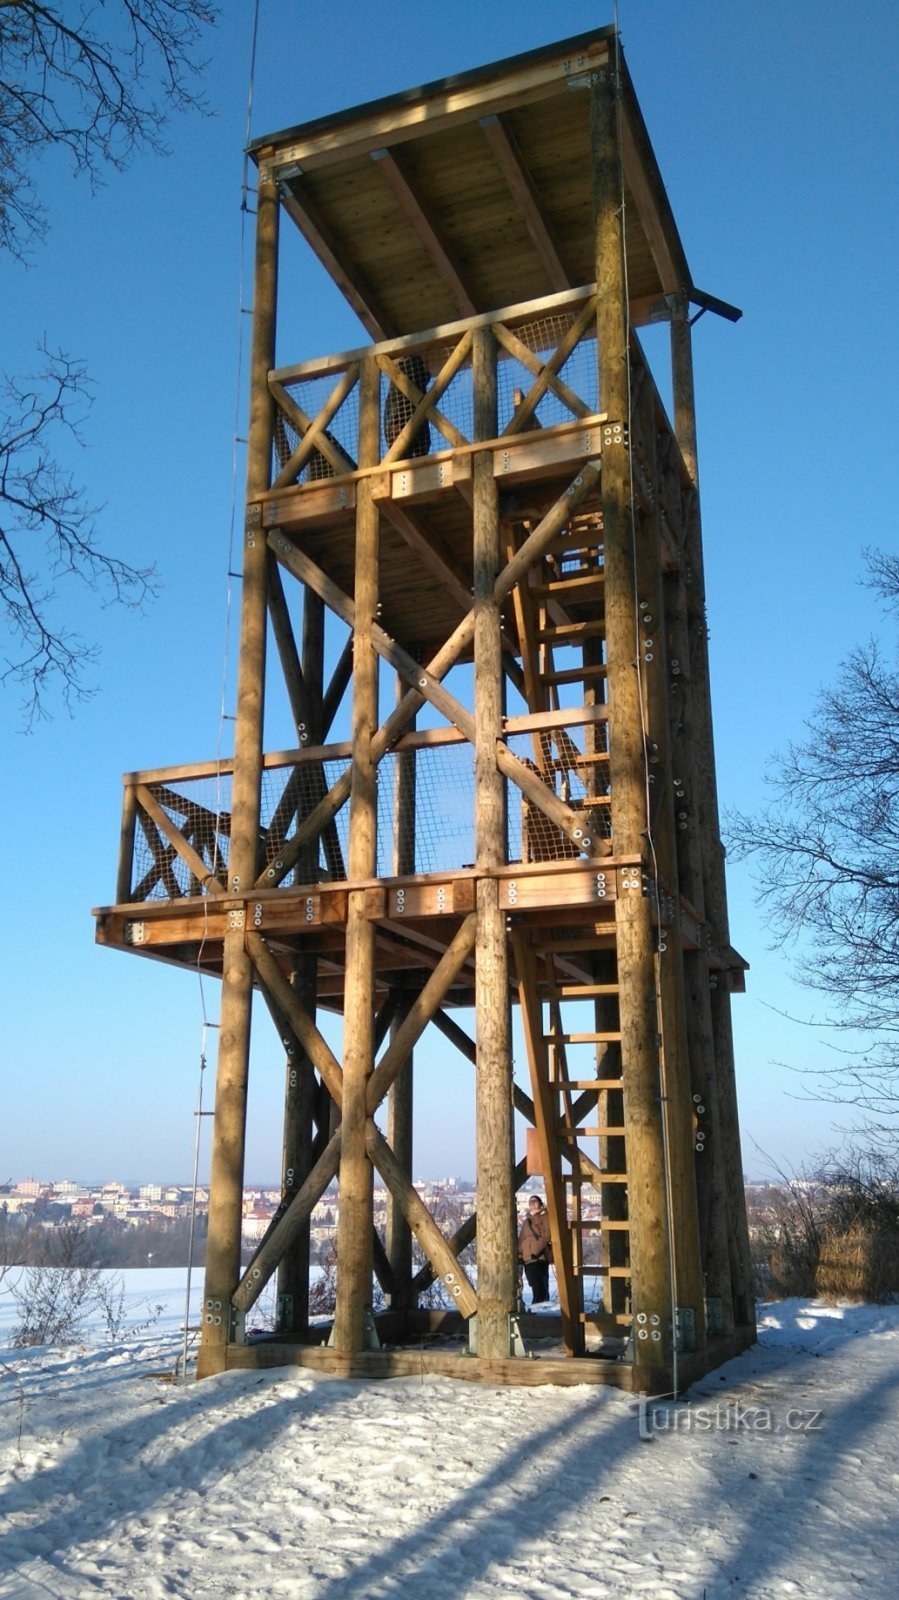 The freely accessible Babina lookout tower